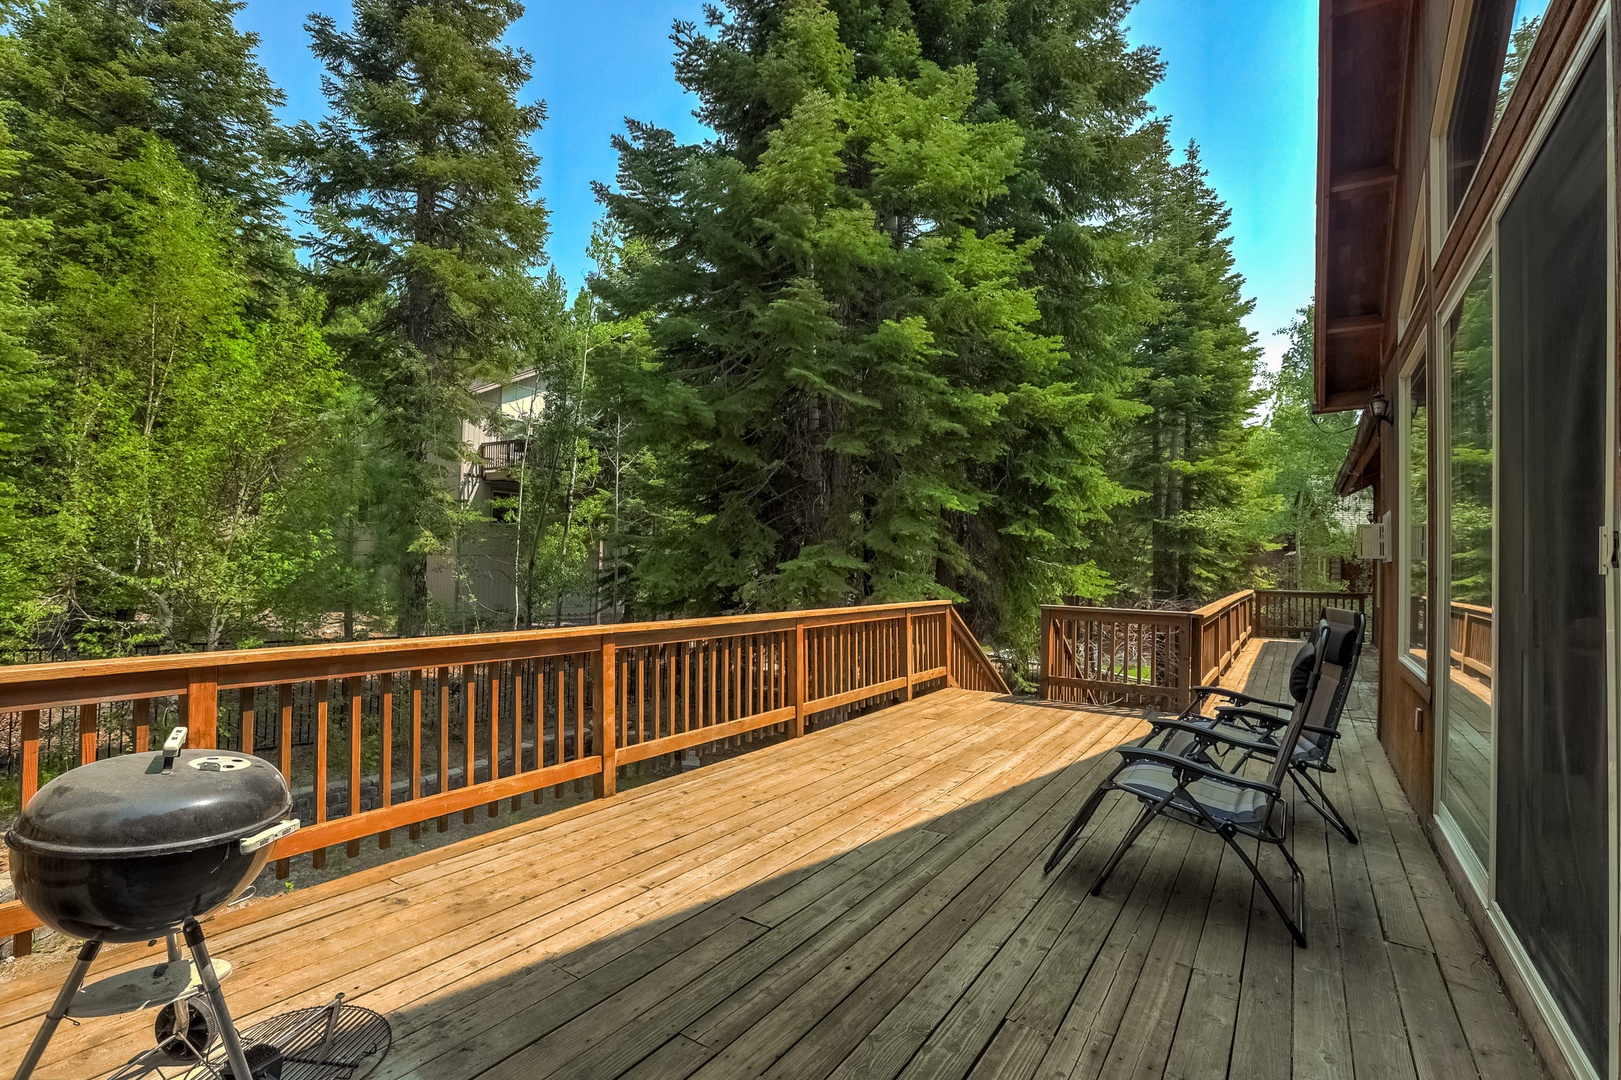 Spacious deck with gas BBQ, forest view, and access to backyard